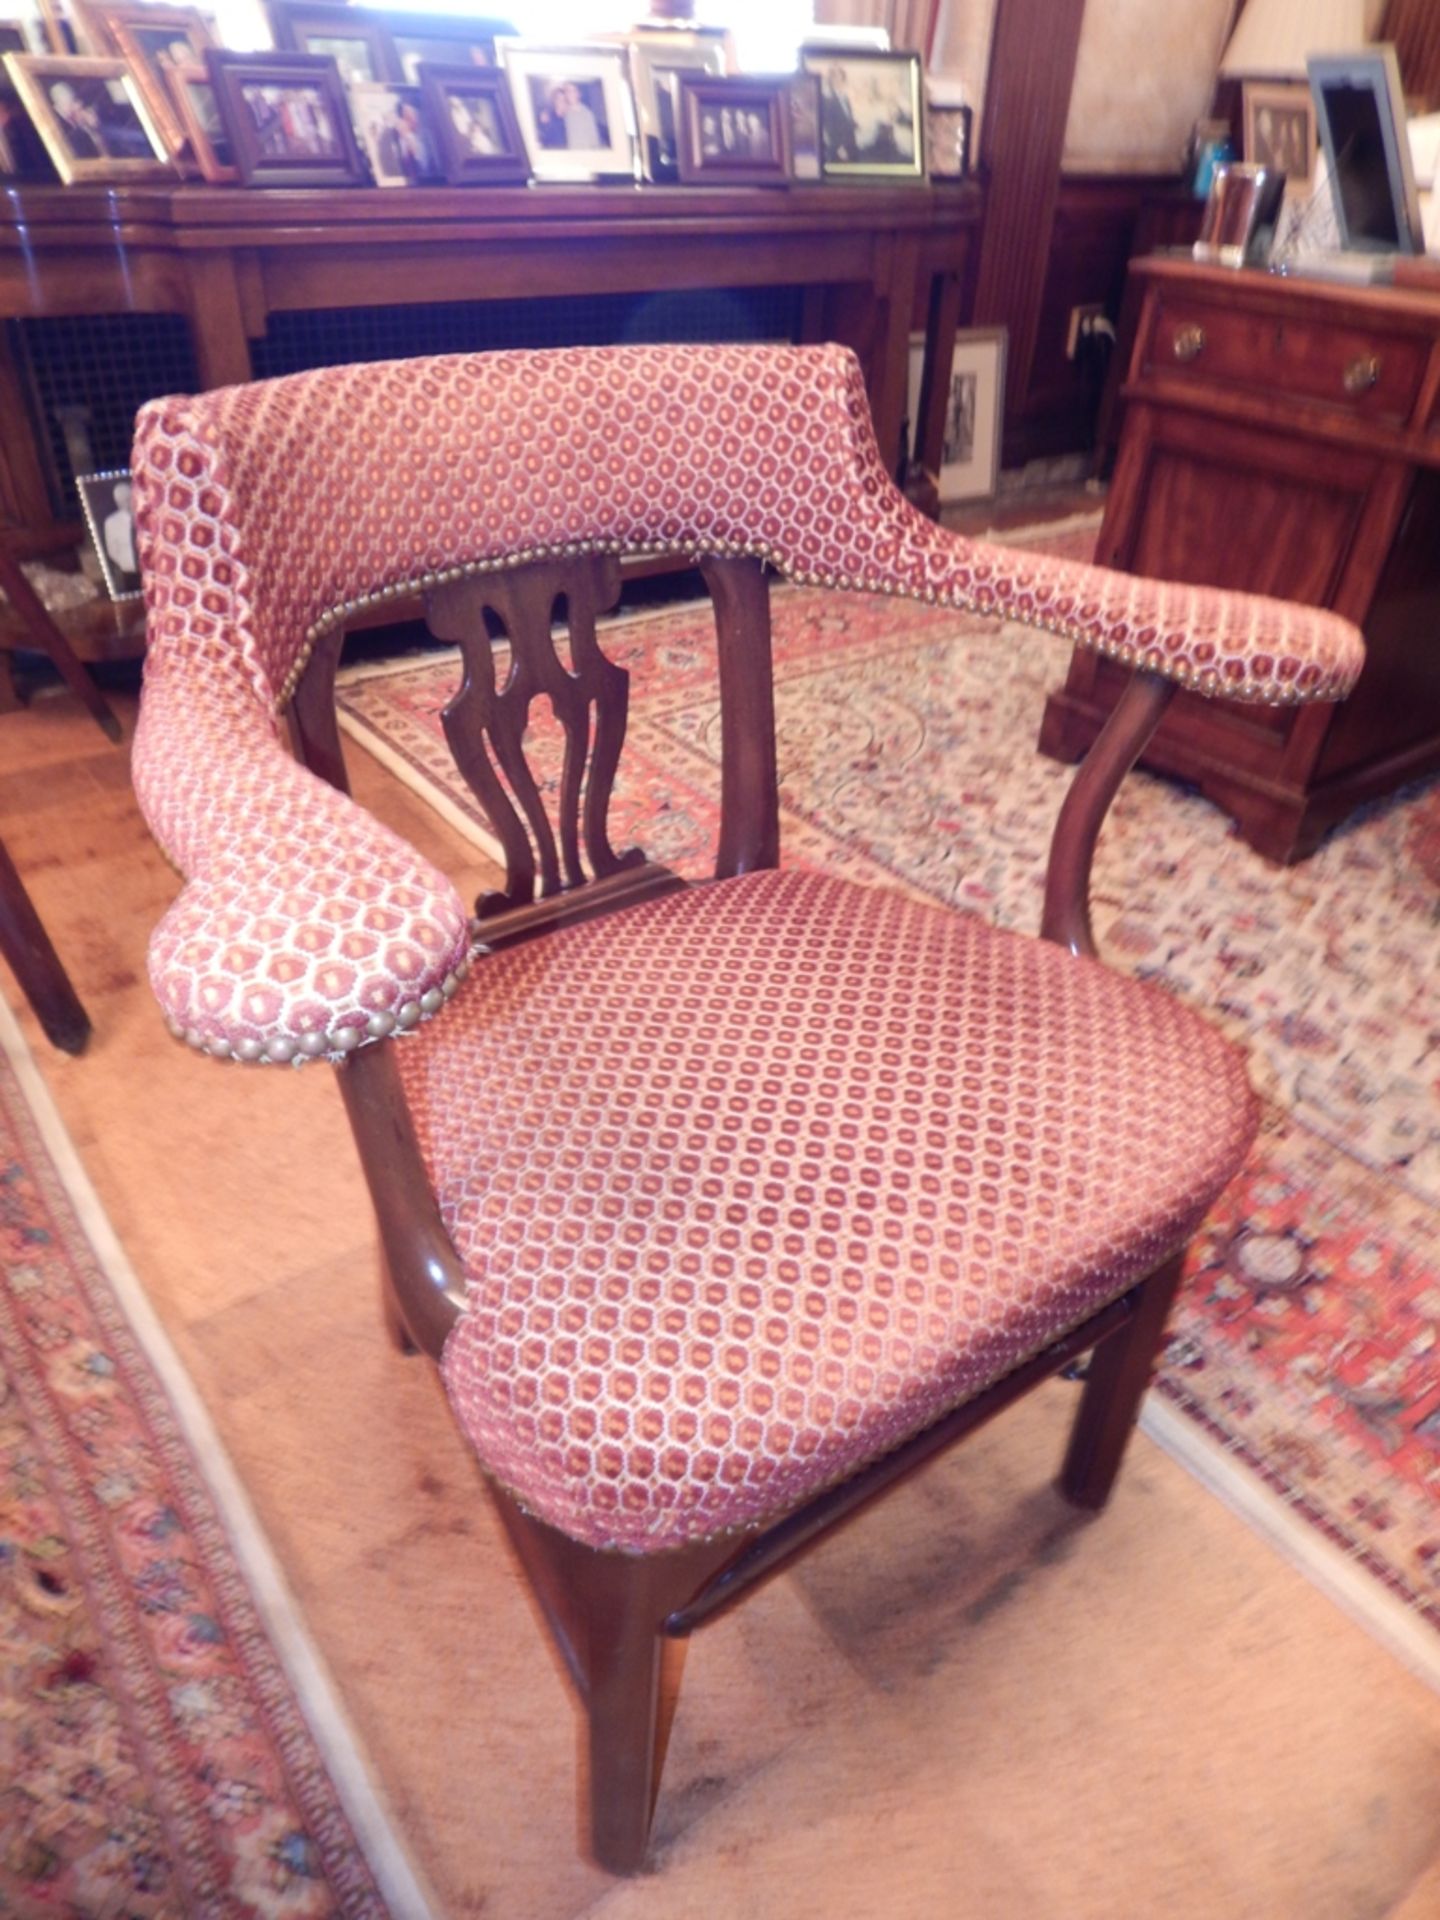 Mahogany Harp-Backed Chairs, possibly Chippendale - Image 2 of 3